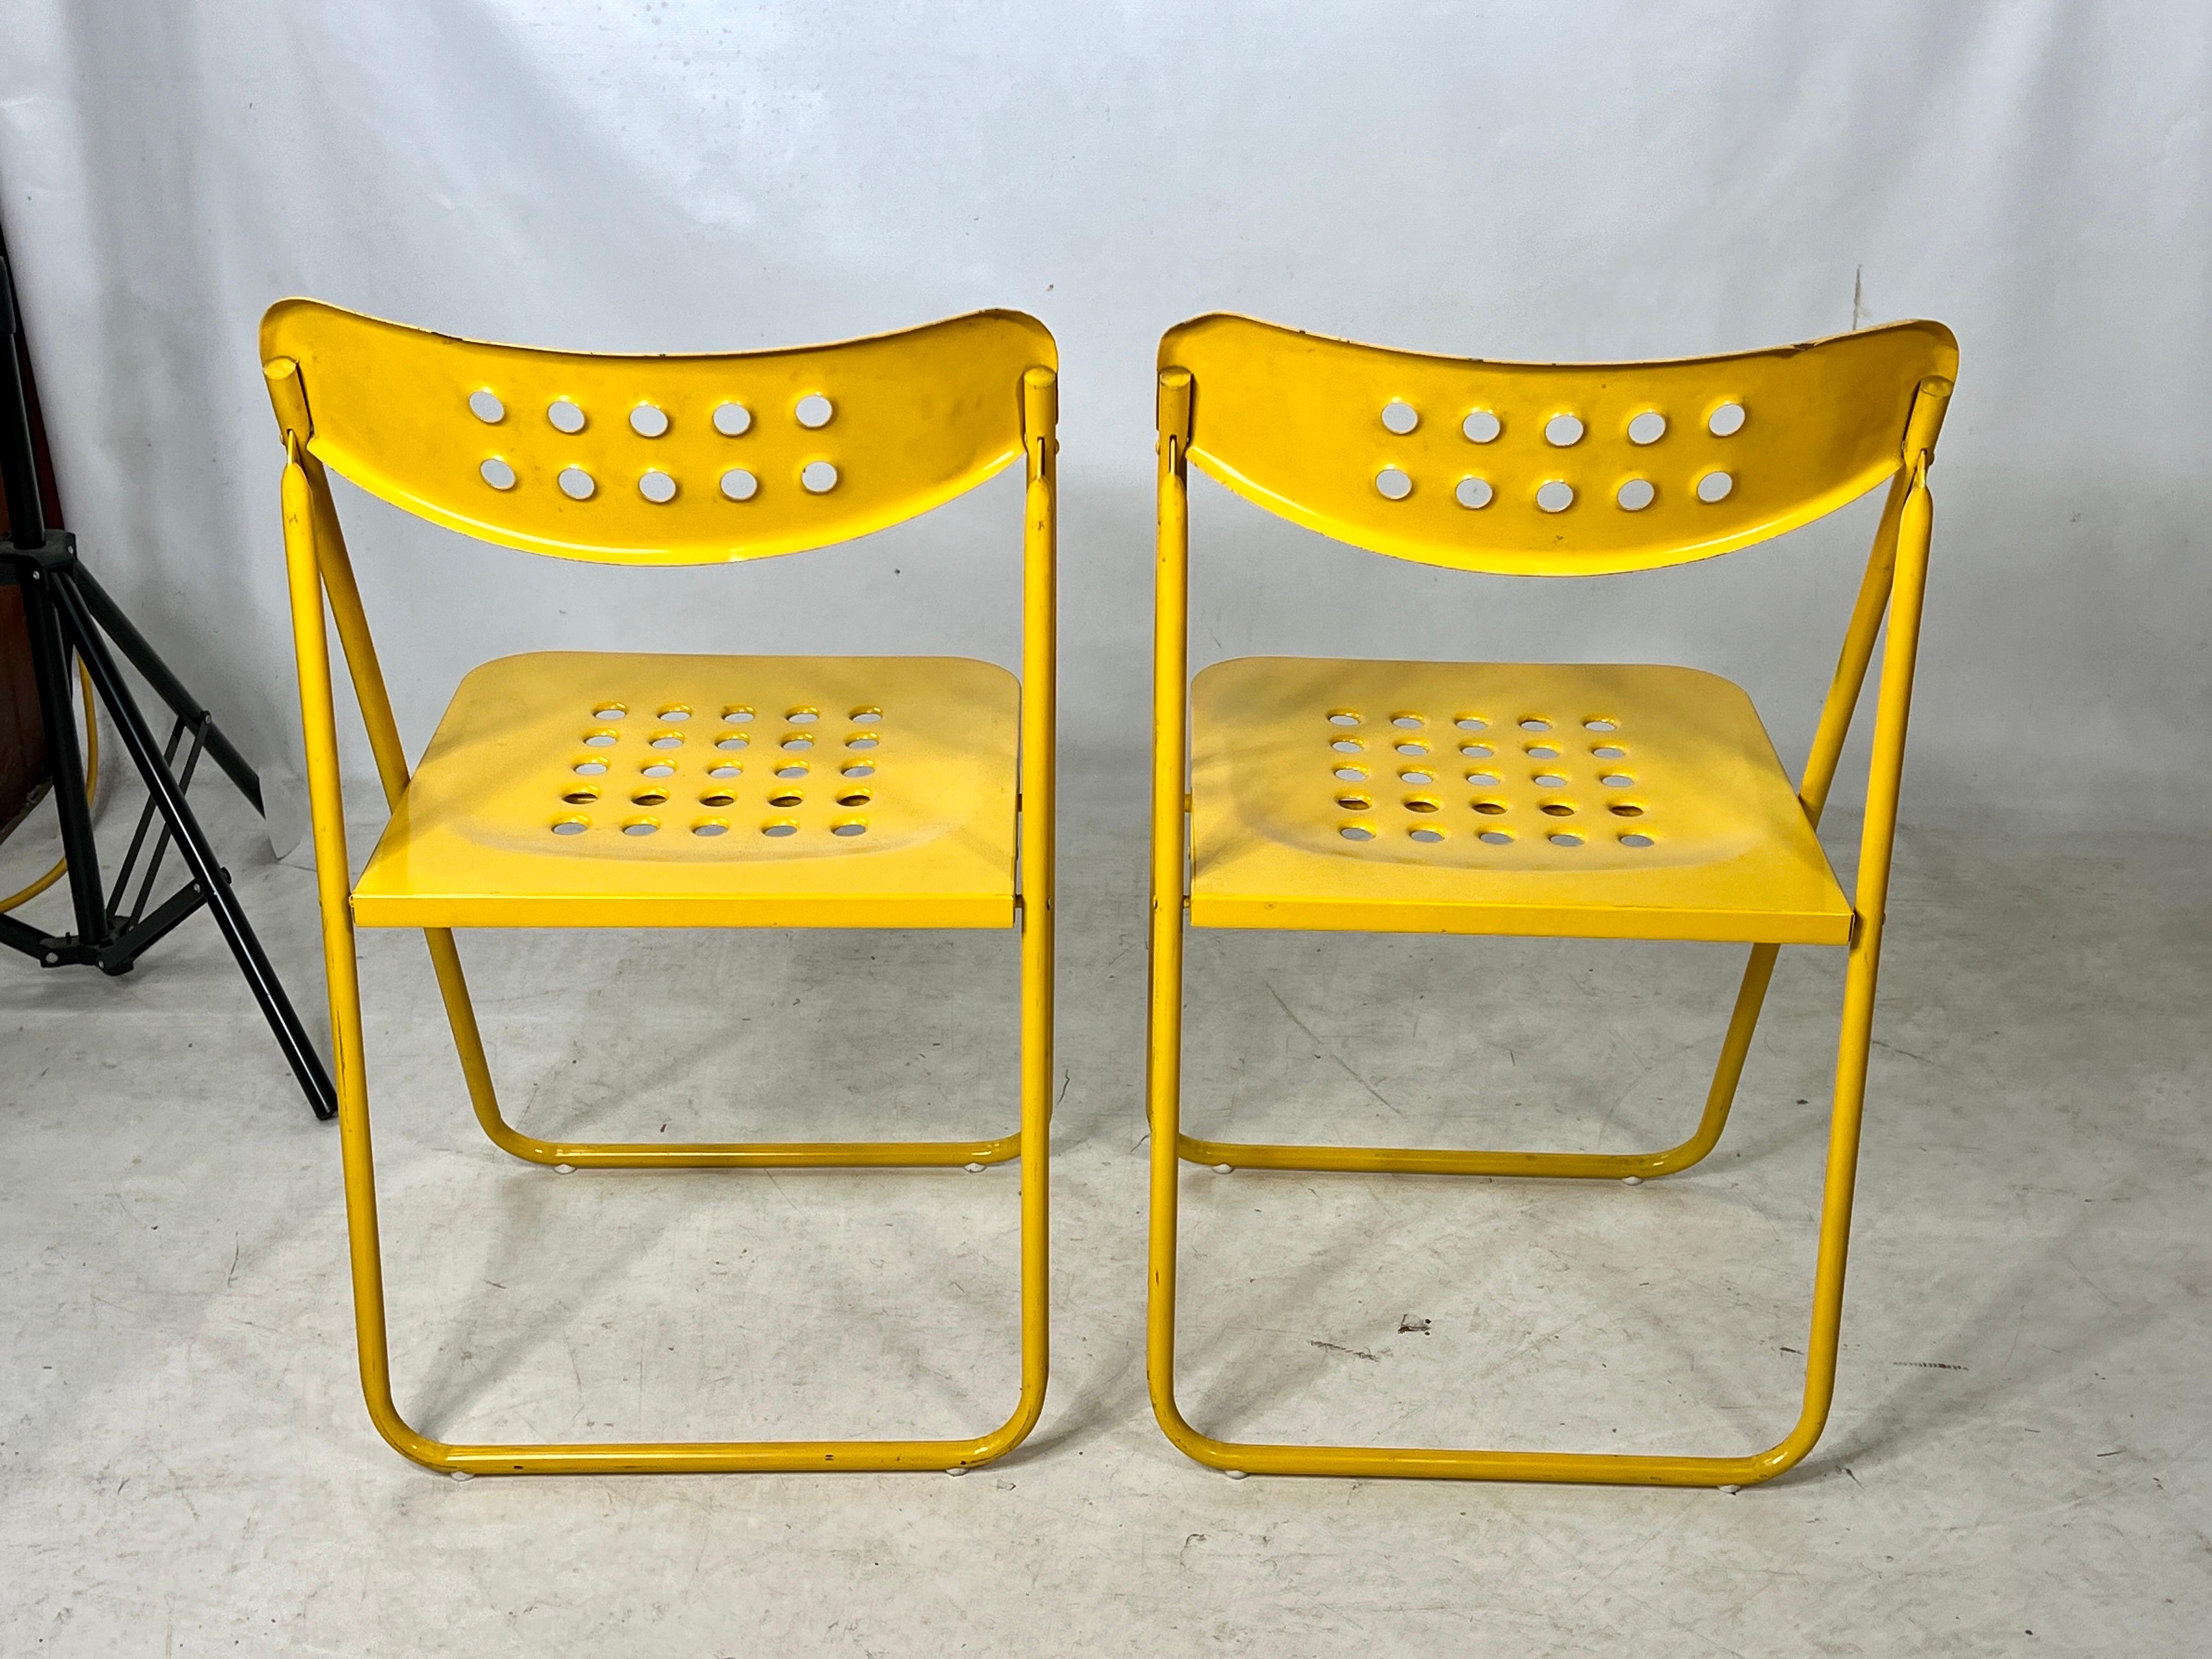 Metal Vintage Yellow Industrial Modern Folding Chairs - a Pair For Sale